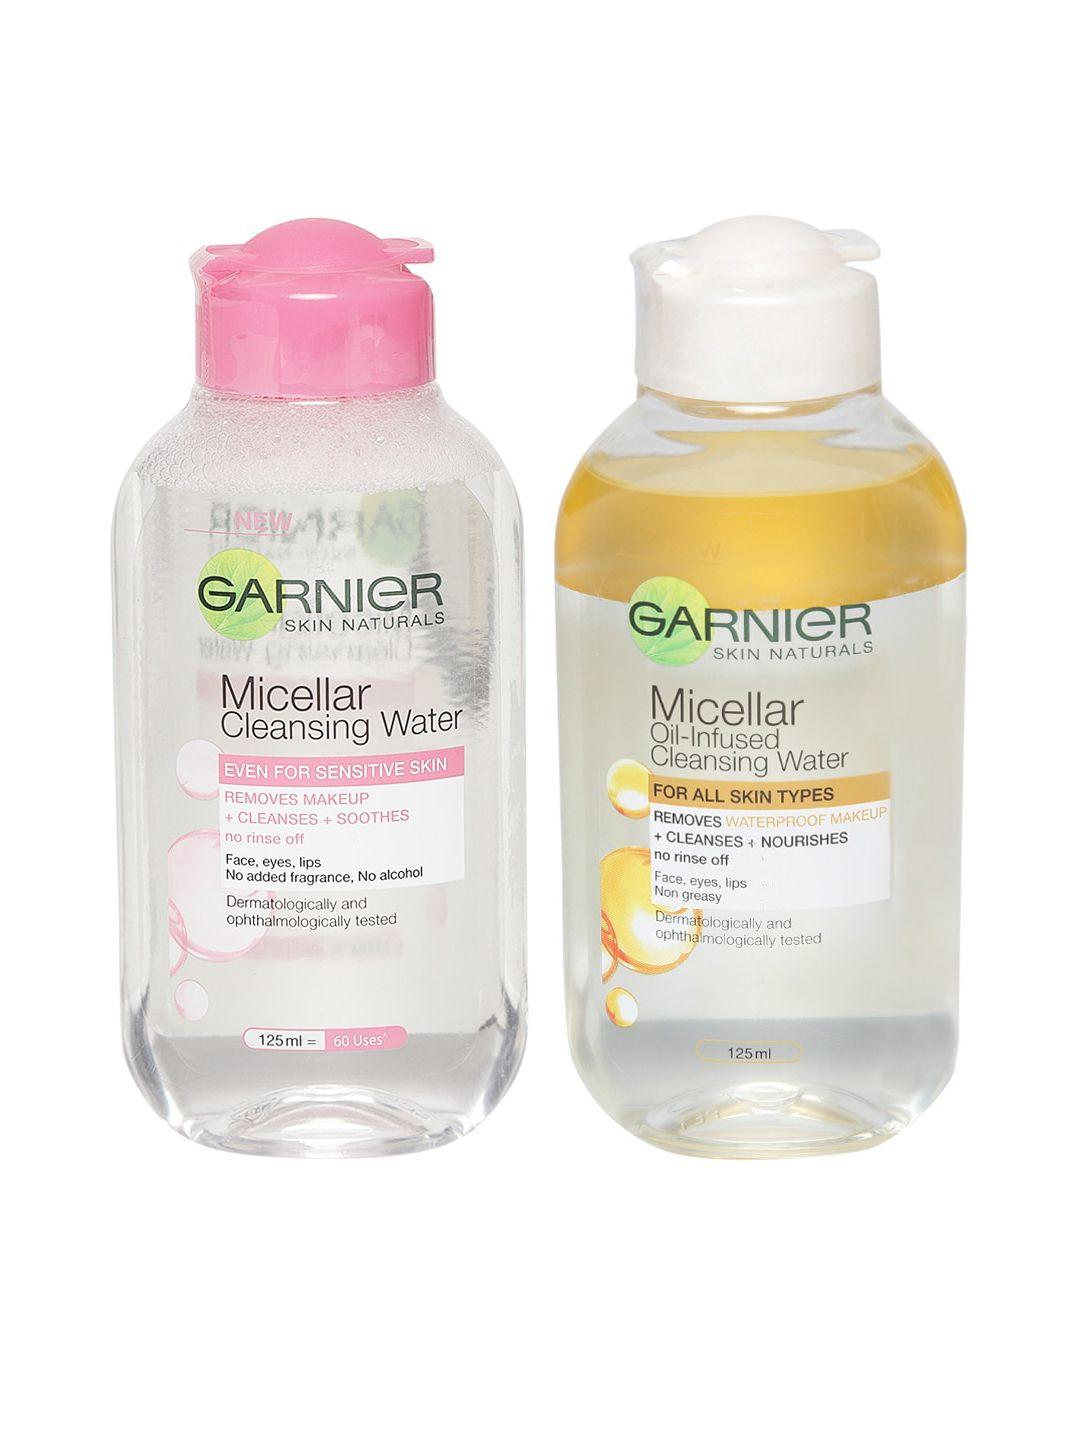 garnier-skin-naturals-set-of-oil-infused-cleansing-water-and-micellar-cleansing-water